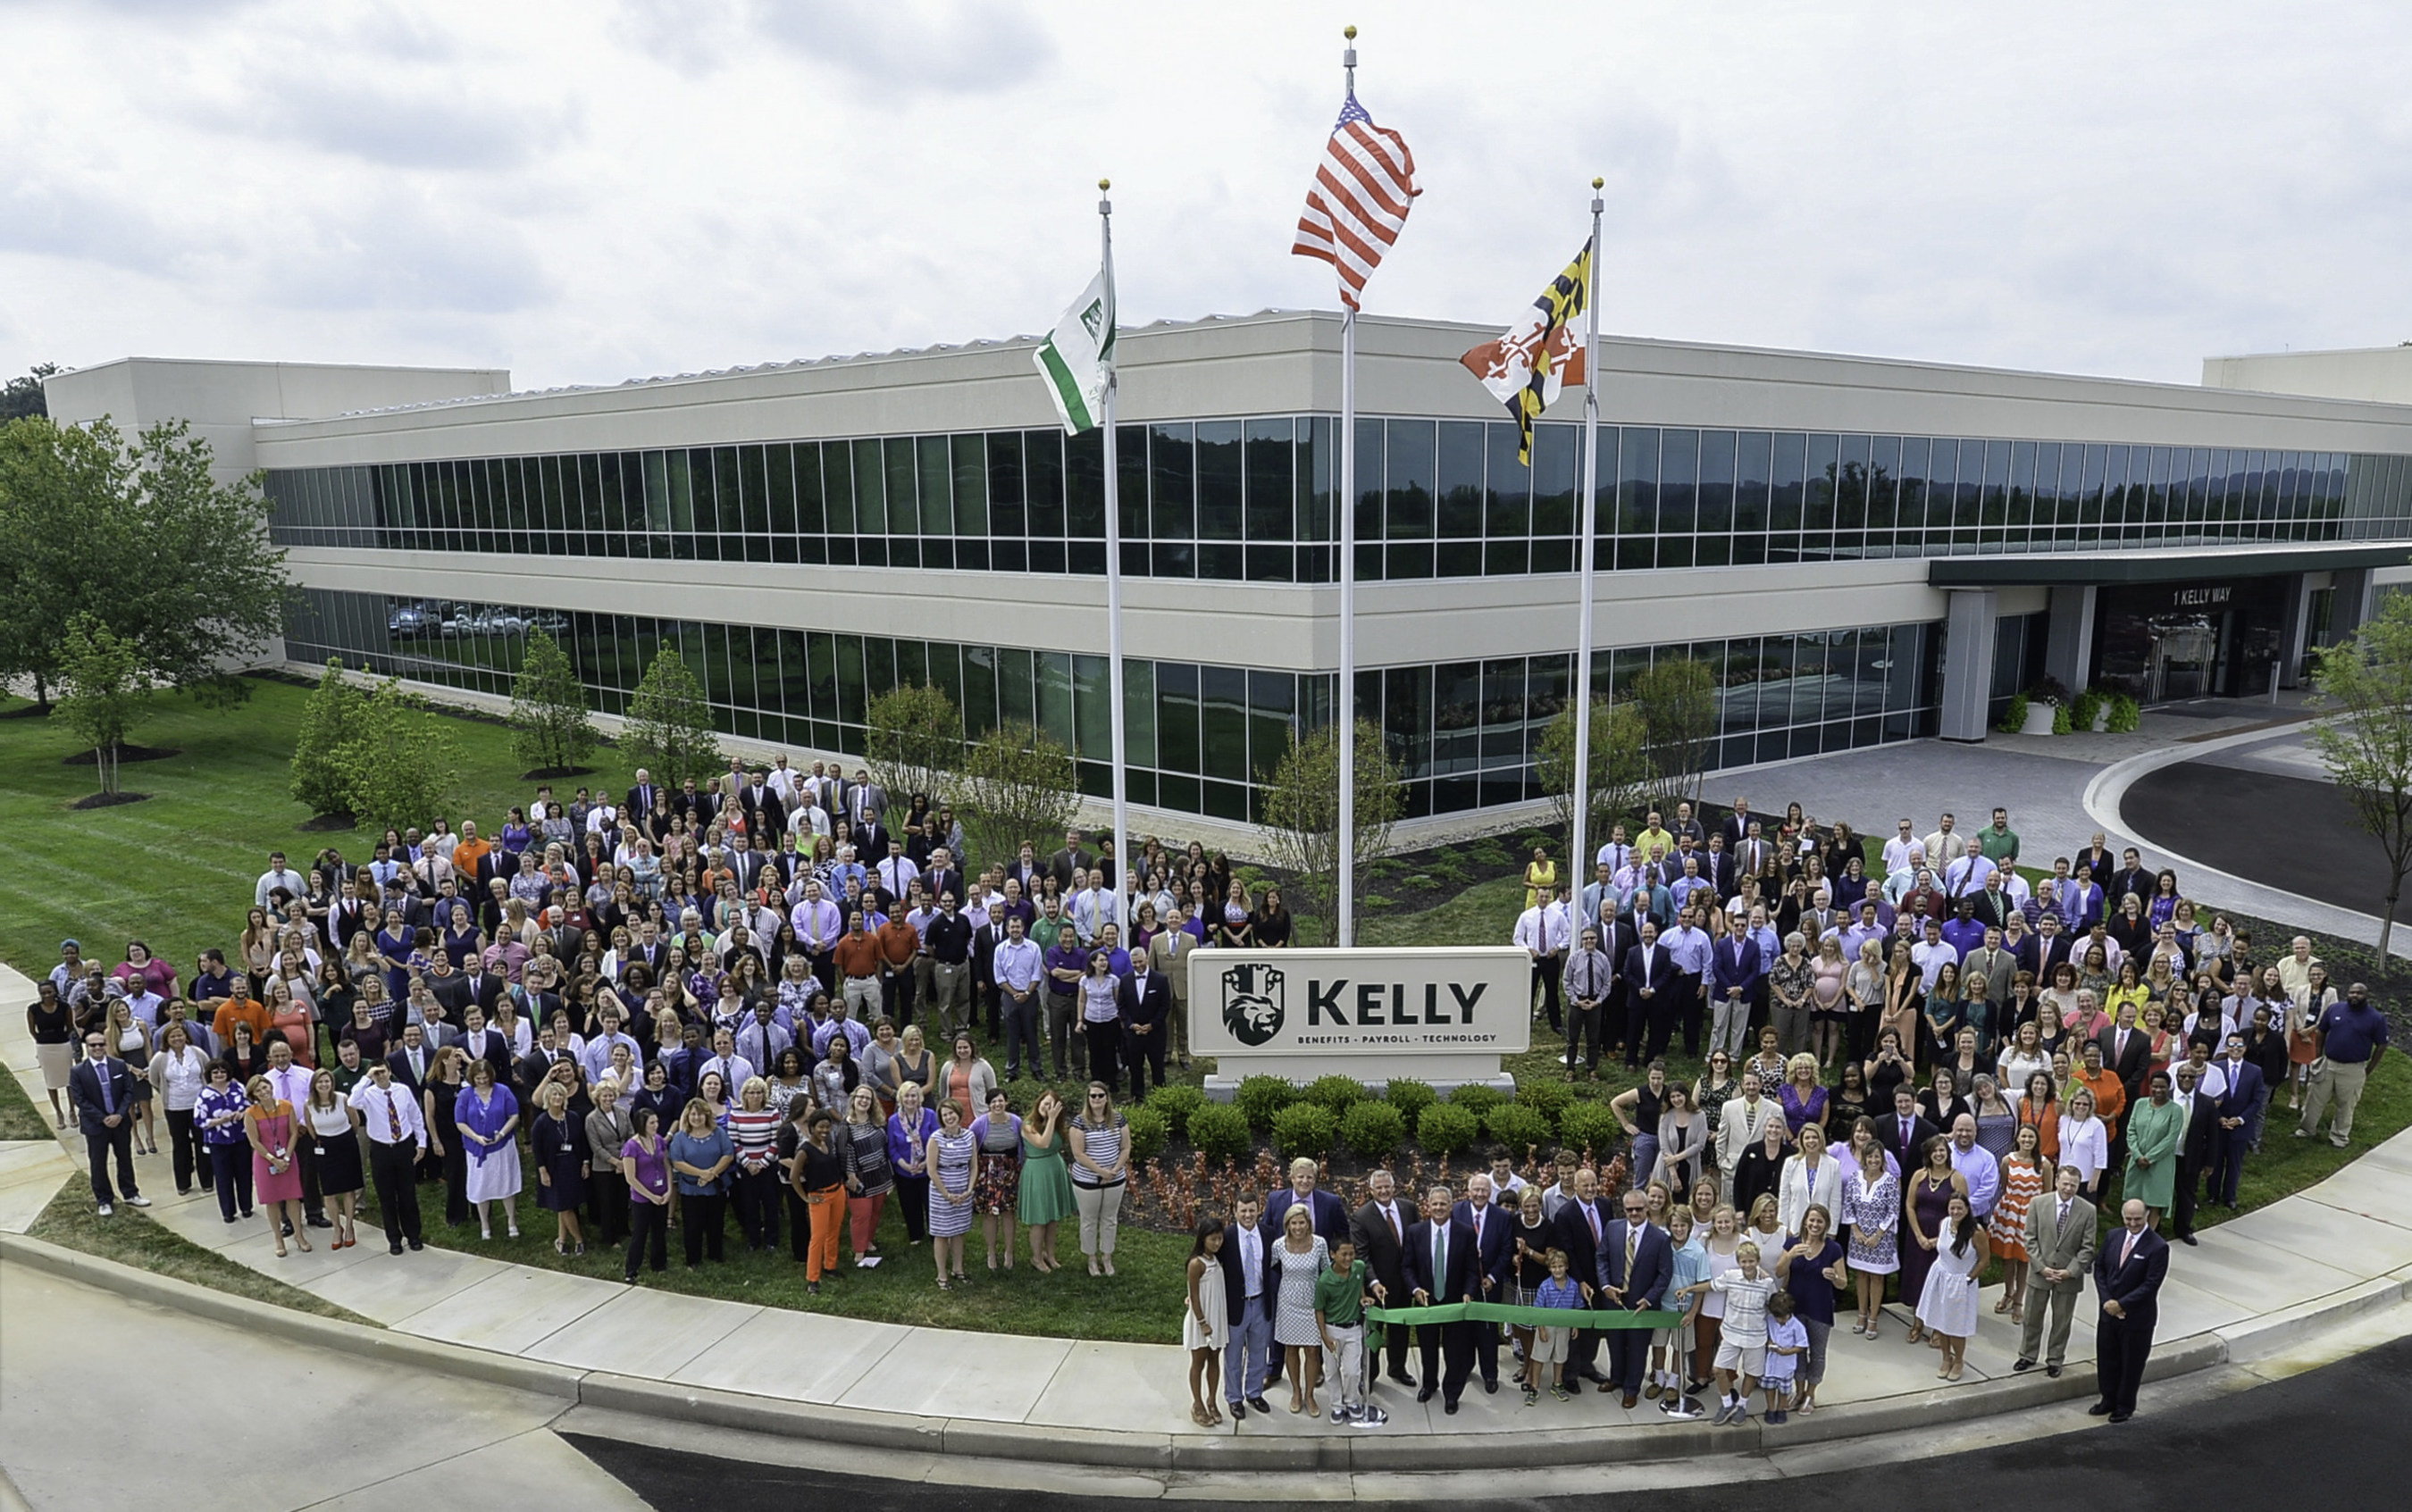 KELLY Headquarters located in Sparks, Maryland